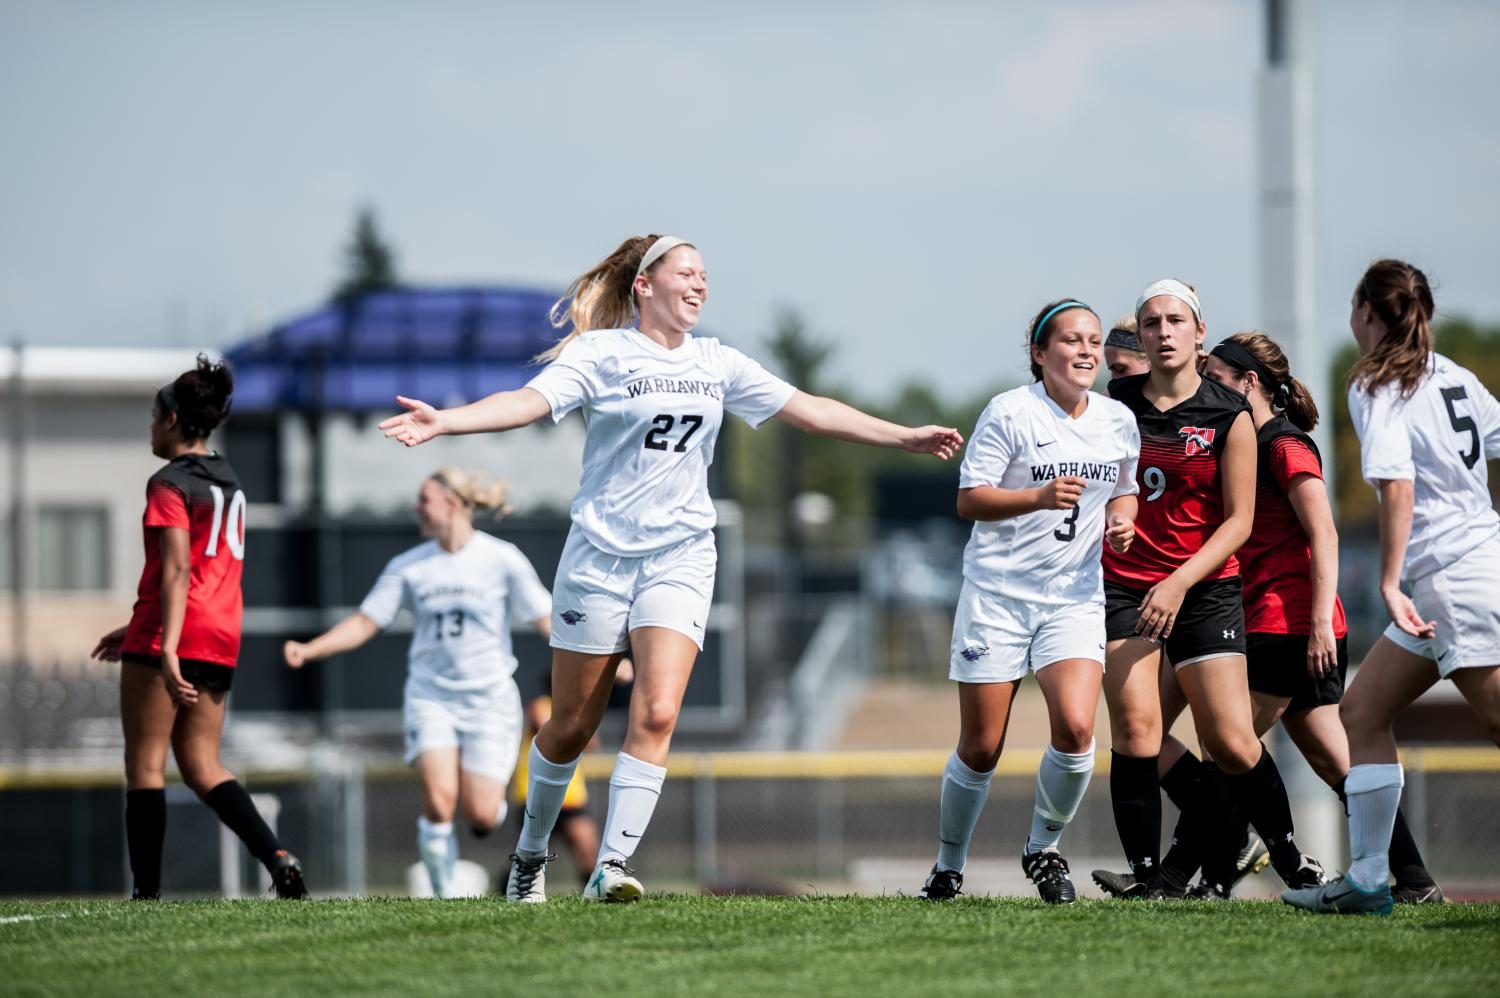 The No. 8 UW-Whitewater women’s
soccer team had an up-and-down
weekend in the “W” Challenge by
racking up a win against Wittenberg
University, 2-1, Sept. 16 but got shutout
to No. 1 Washington University in
St. Louis, 1-0, Sept. 17.